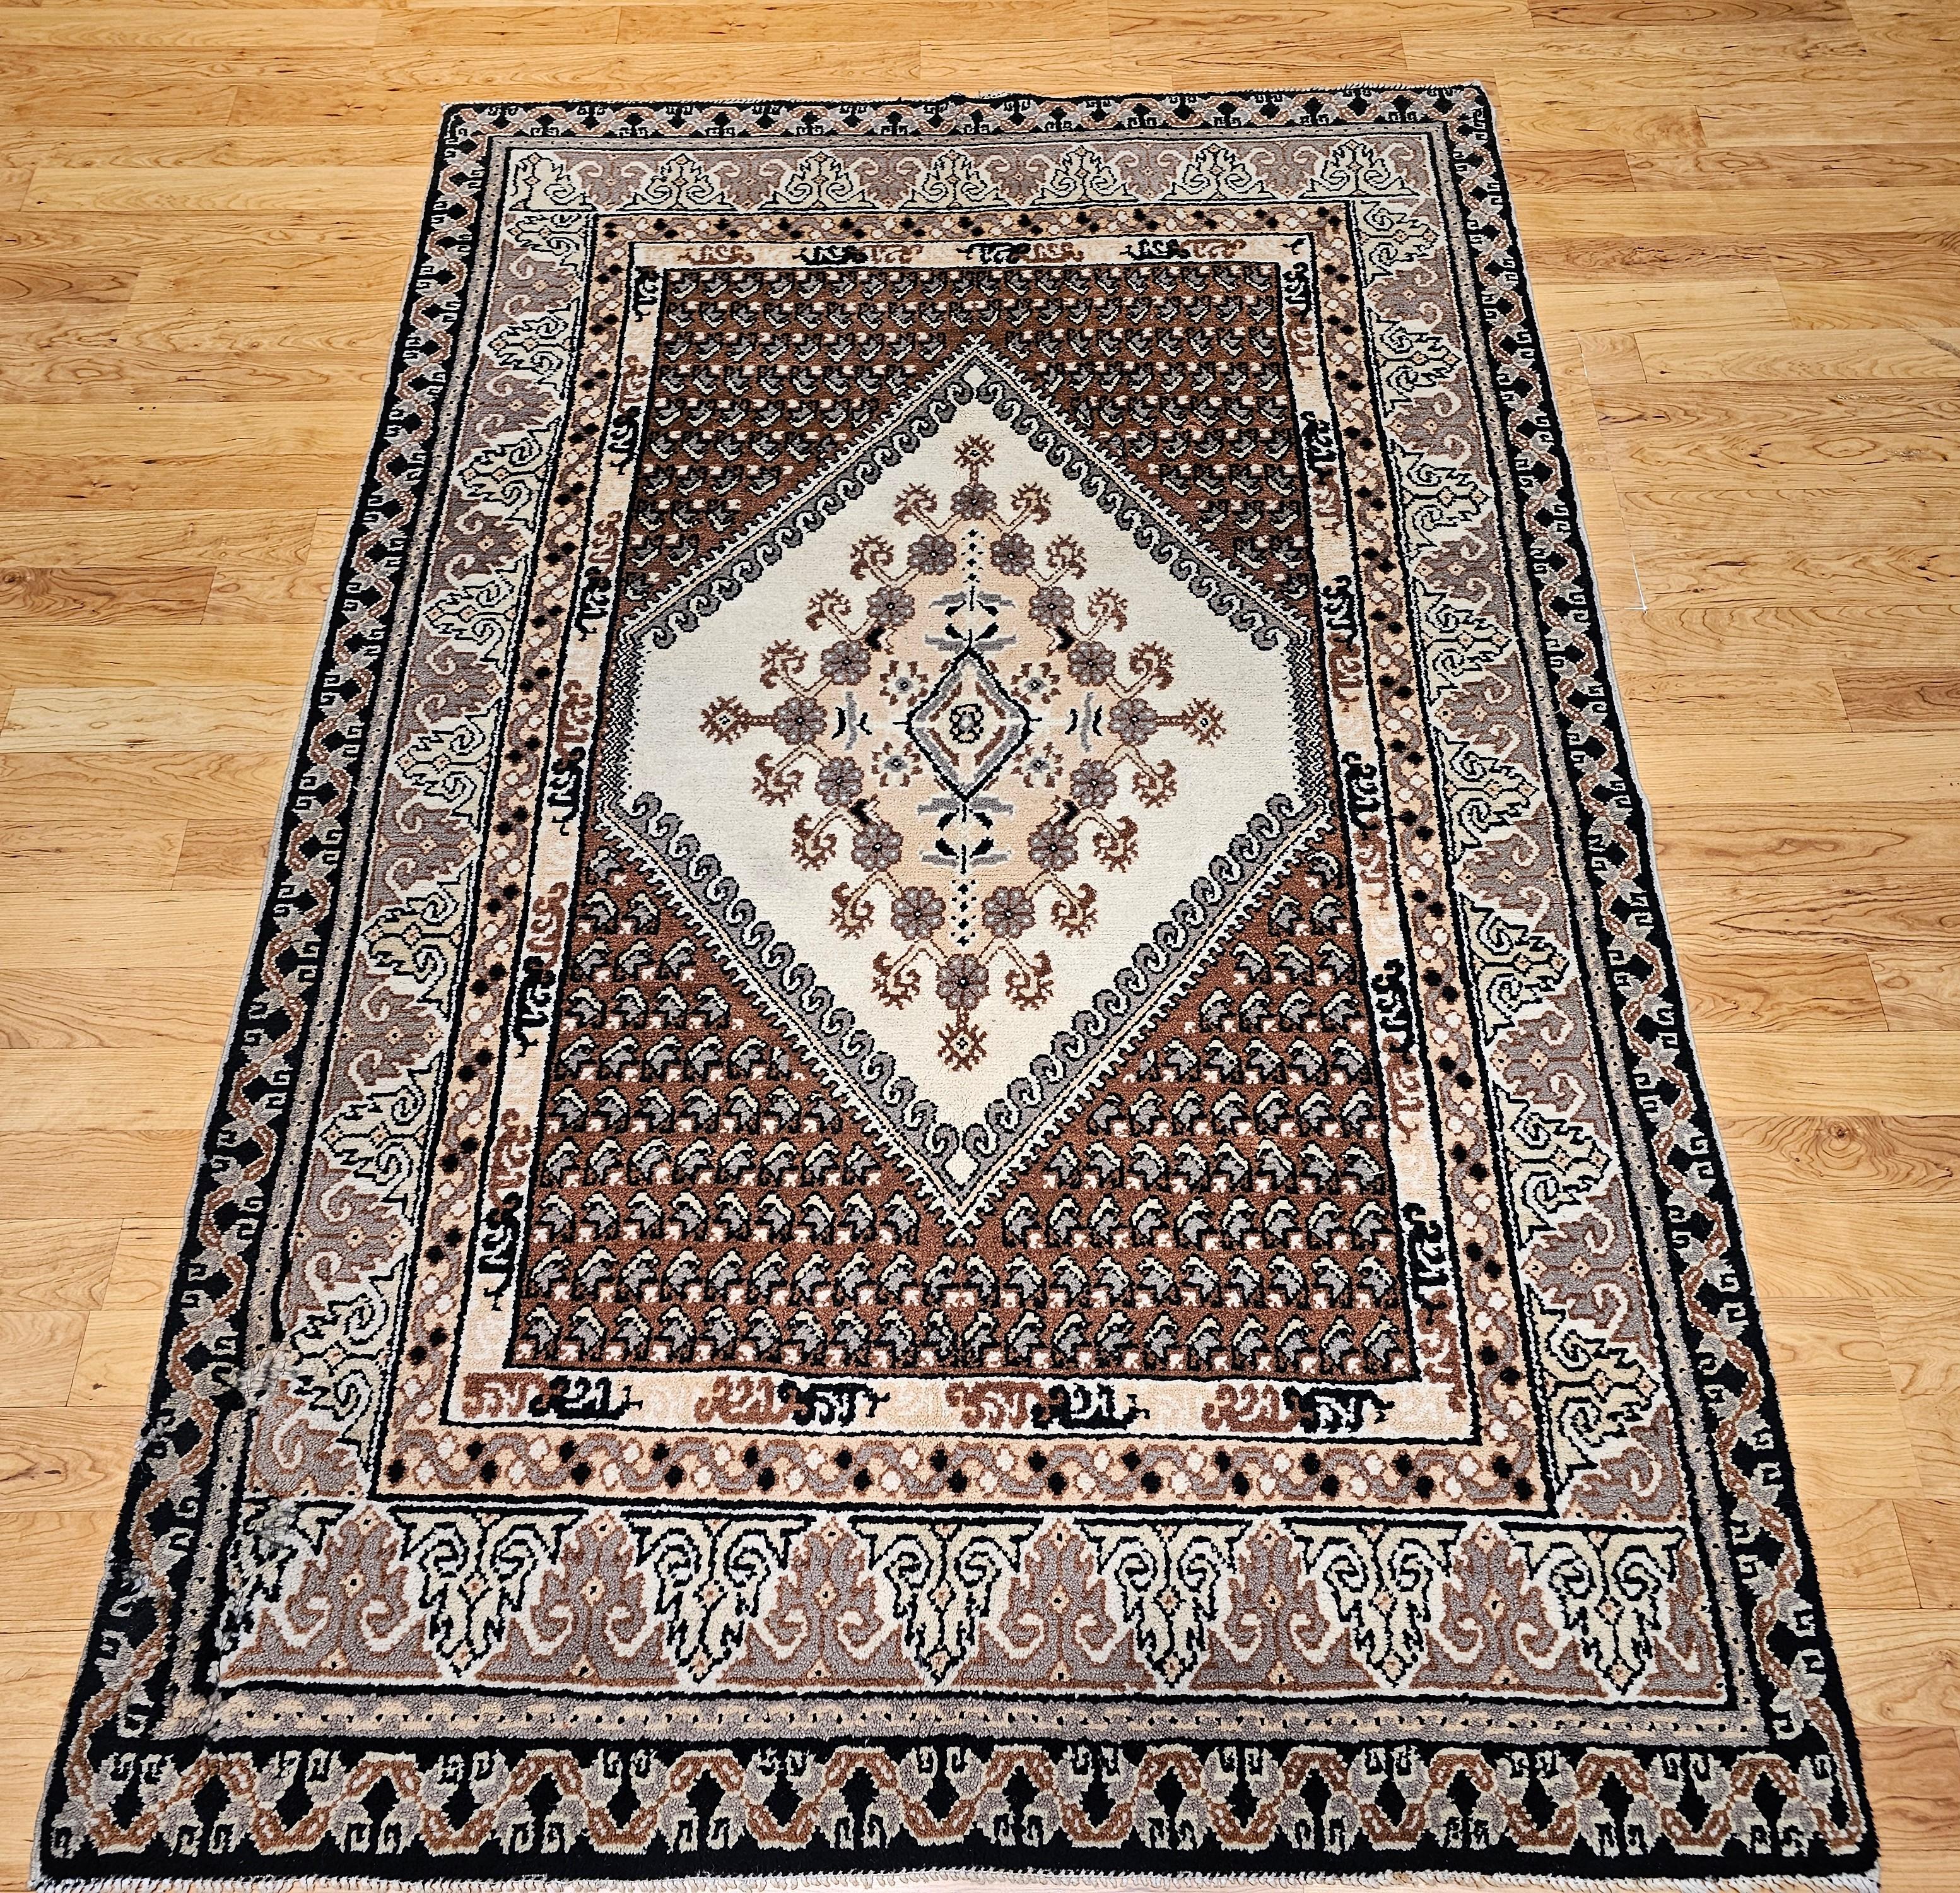 Vintage Moroccan room size rug in a geometric pattern in ivory, brown, chocolate, and gray.  This Moroccan rug has a central medallion in ivory and brown with corners containing paisley designs in chocolate color.  The border has a geometric pattern